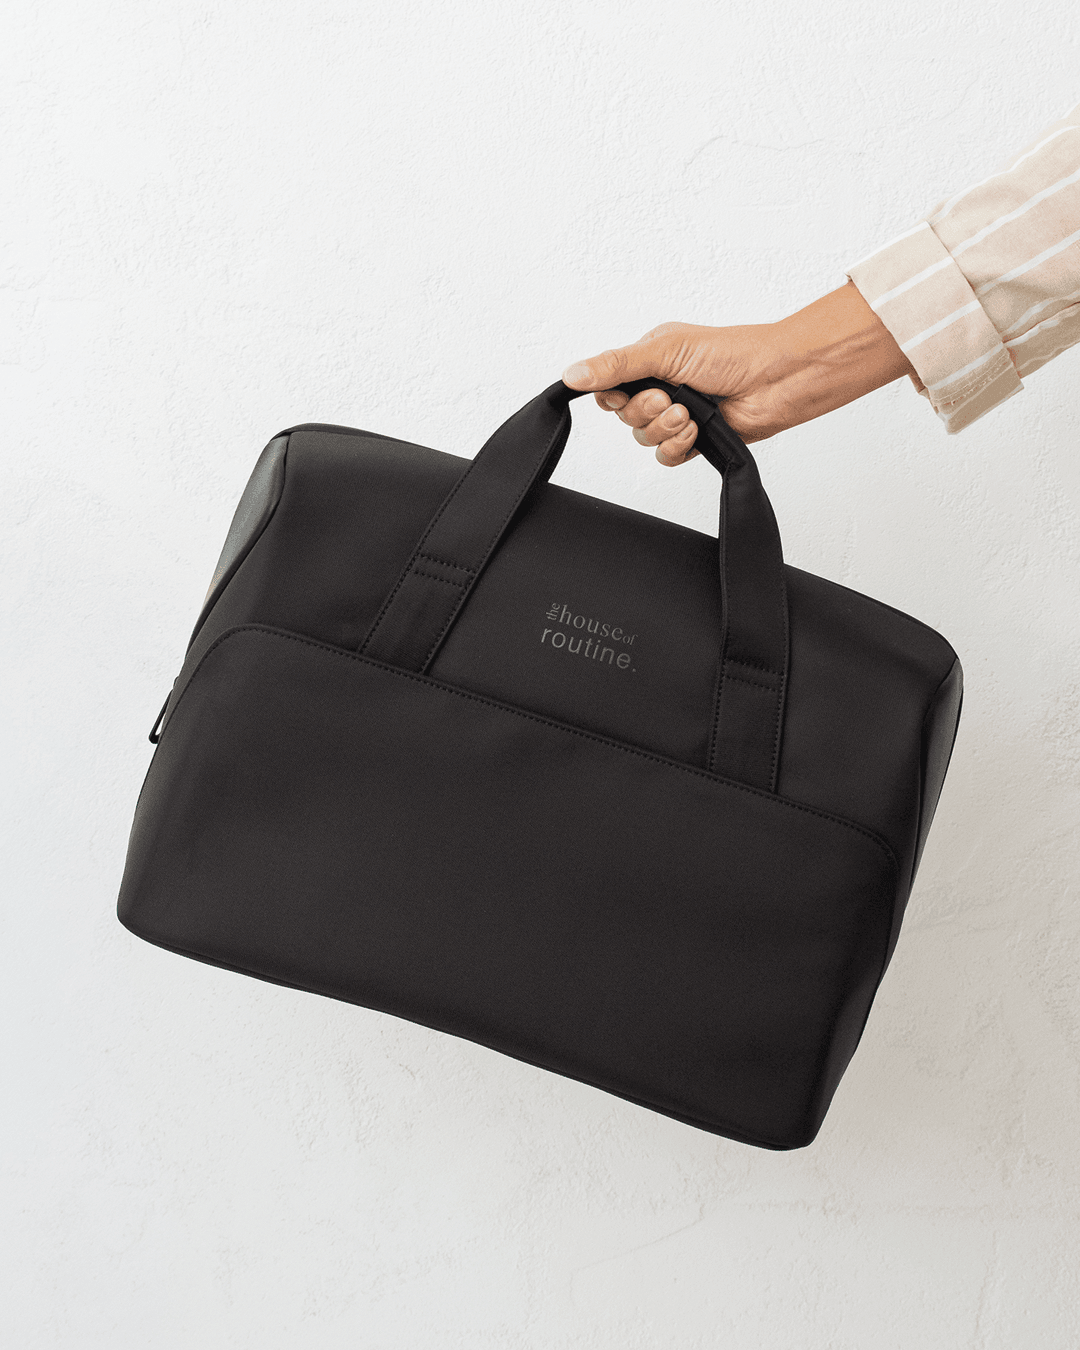 Routine Laptop Bag - The House of Routine